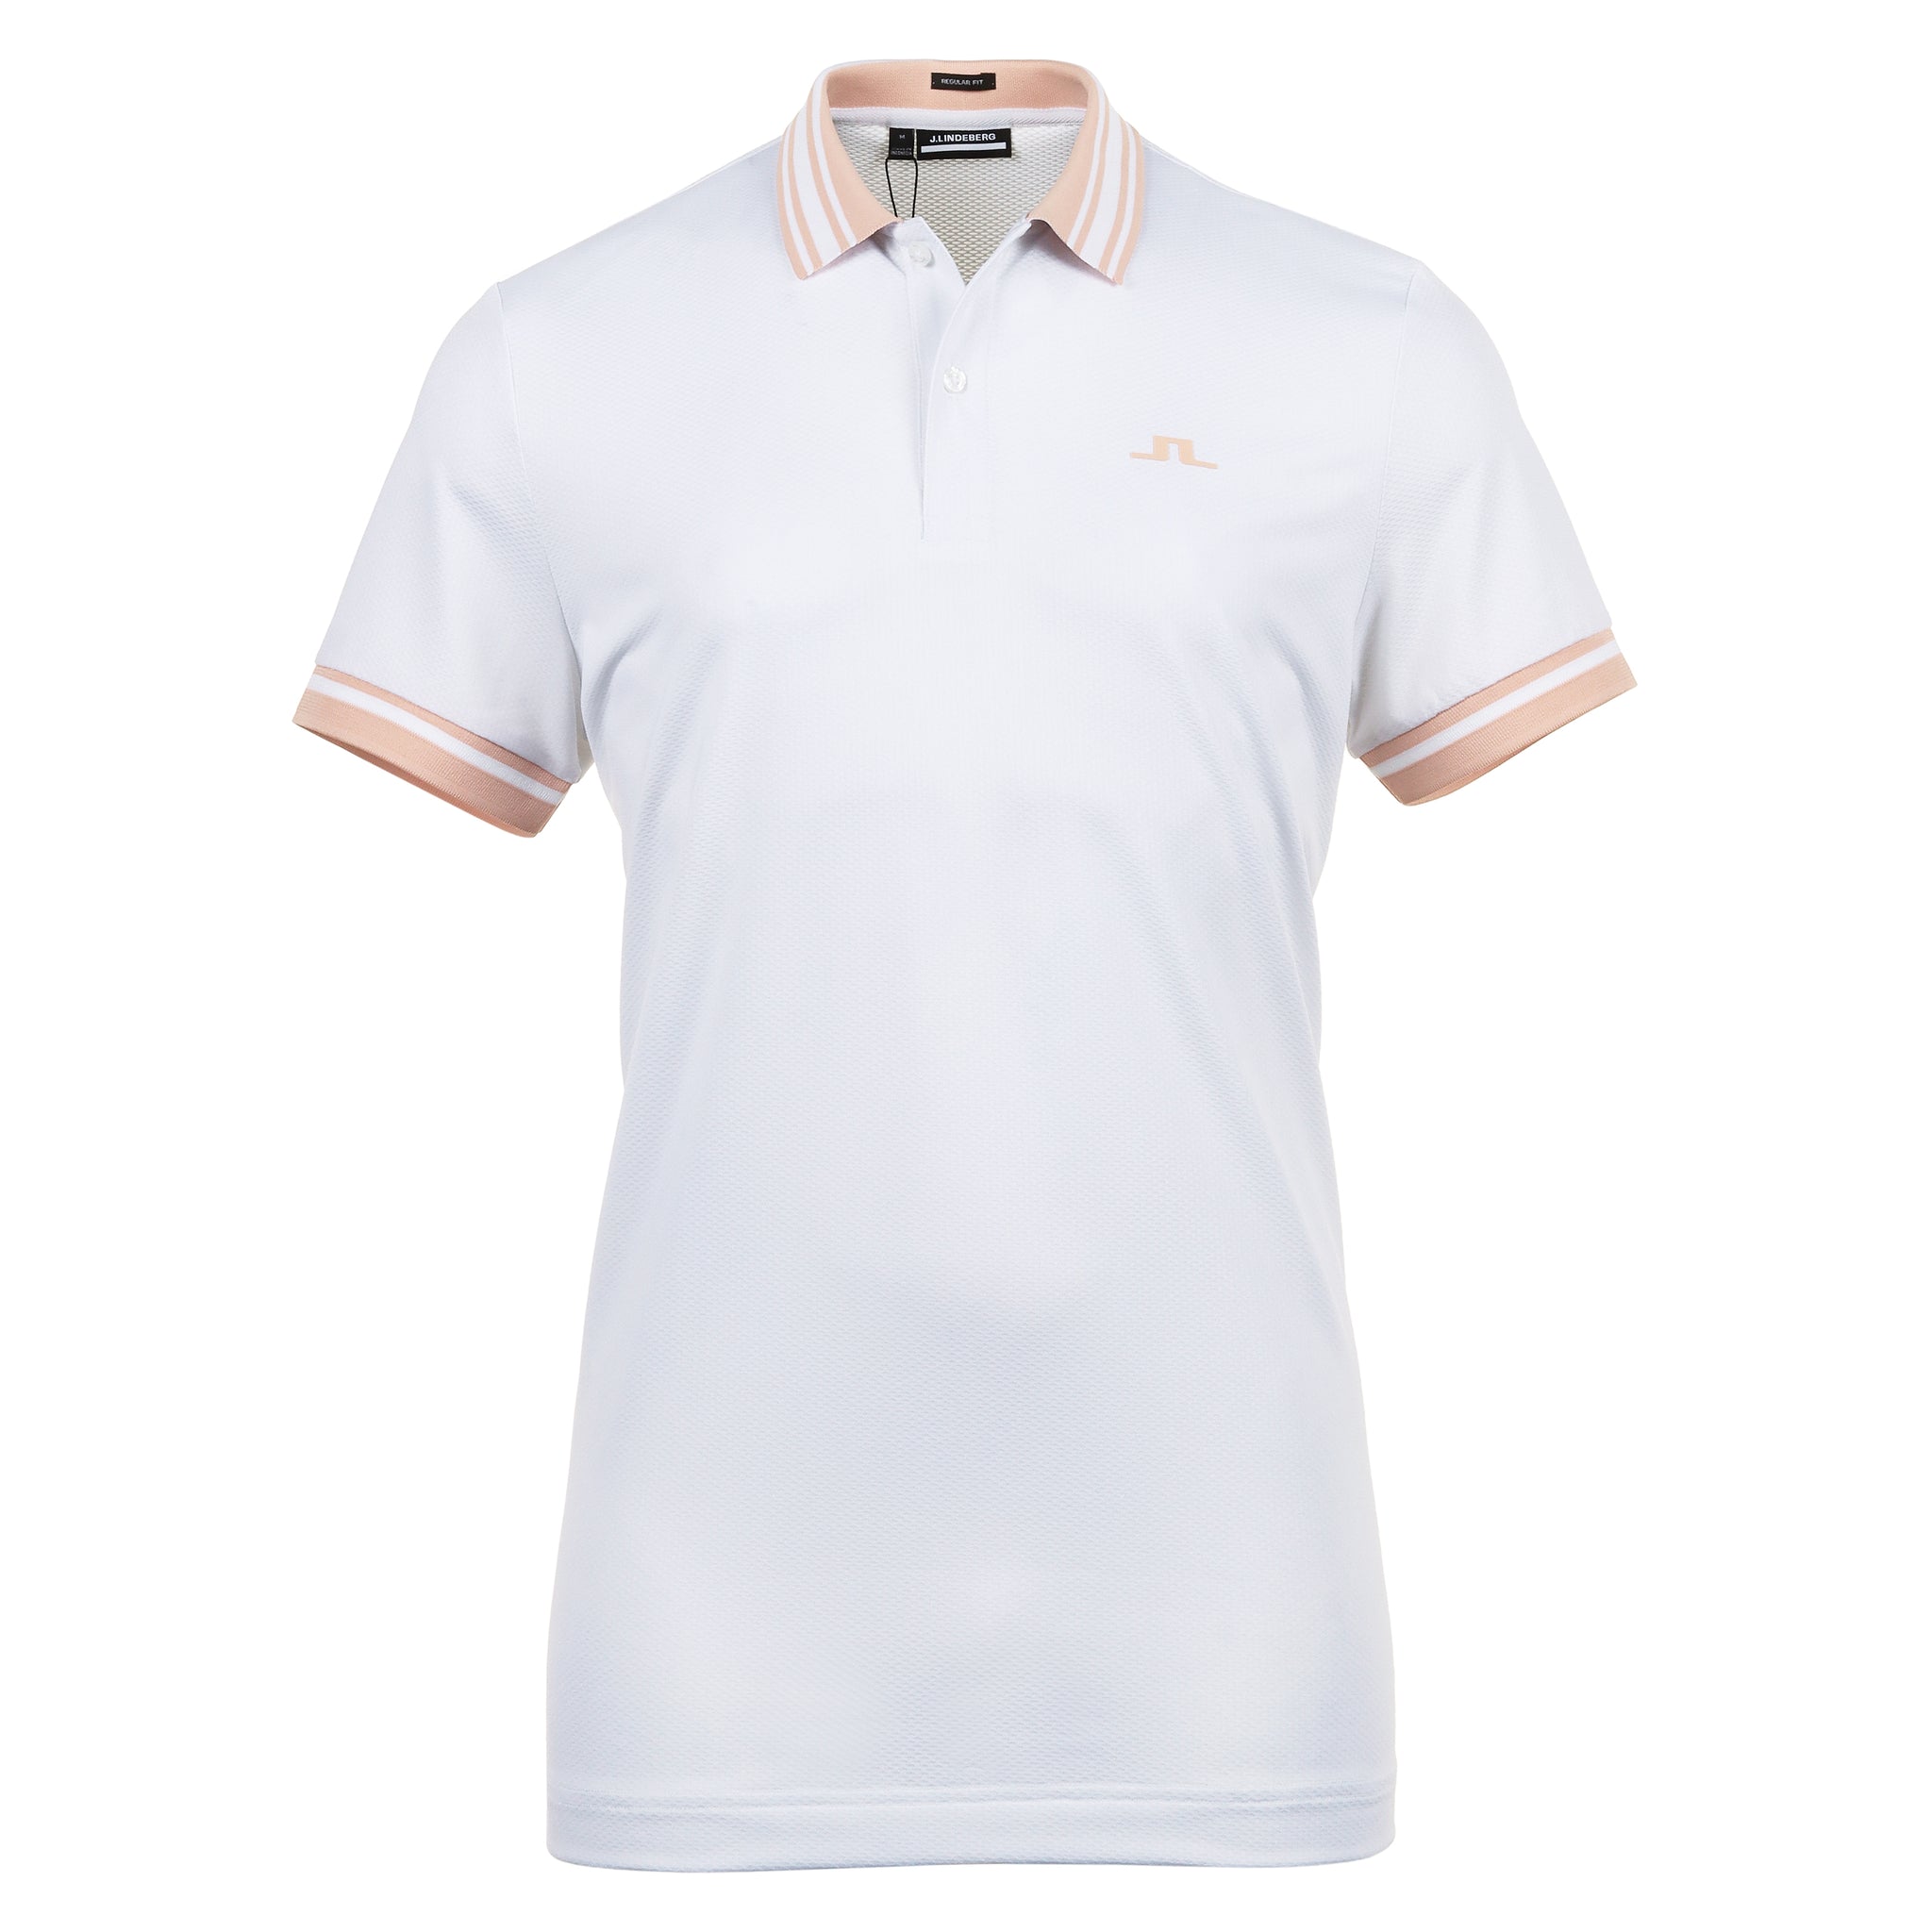 J.Lindeberg Golf Reeve Polo Shirt GMJT10039 White 0000 | Function18 ...